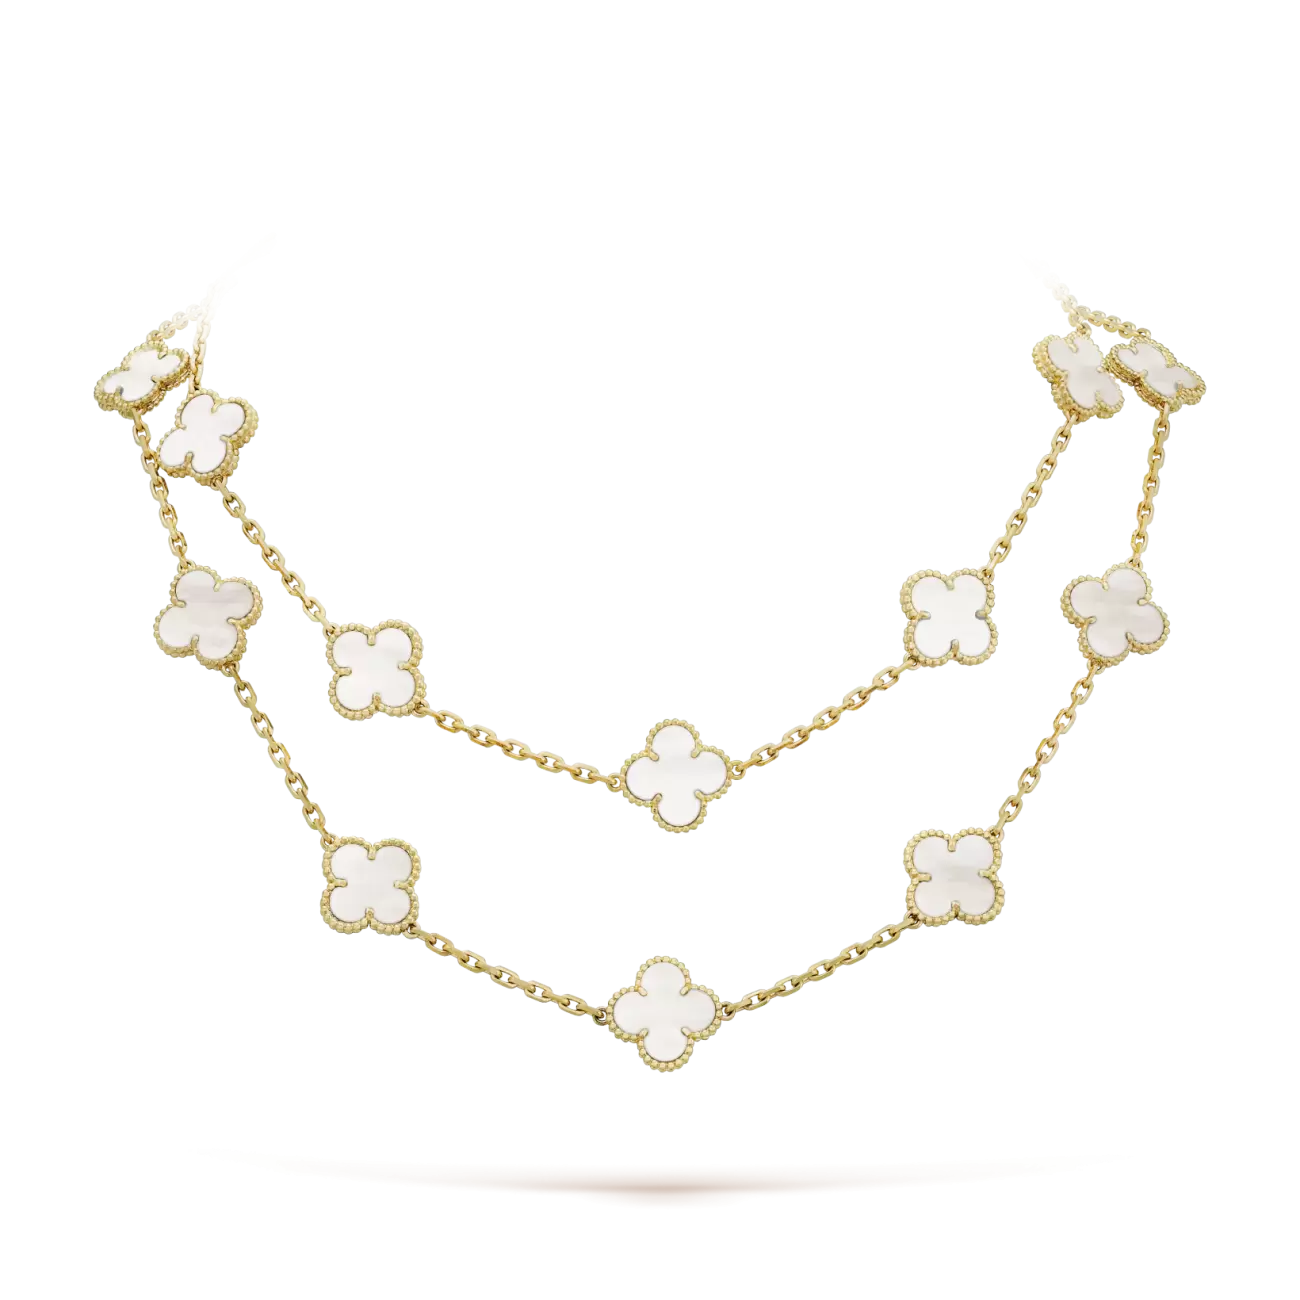 Vintage Alhambra long necklace, 20 motifs yellow gold, white mother-of-pearl